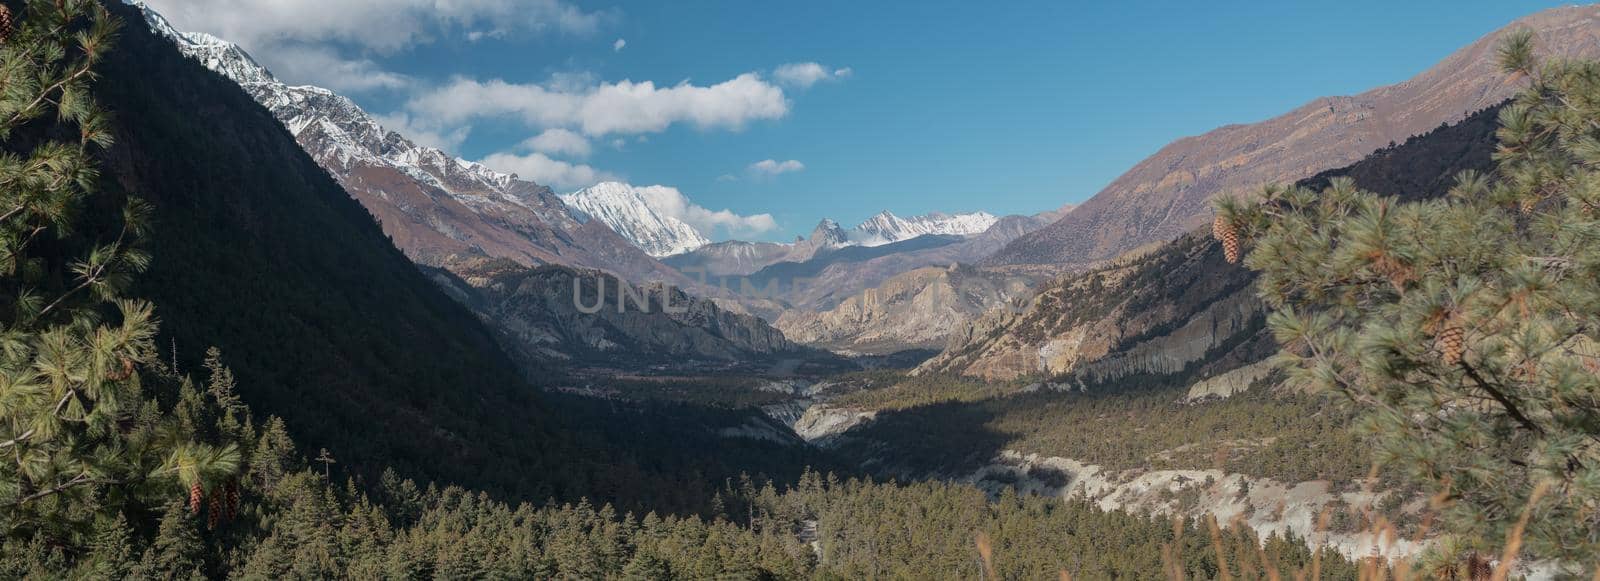 Panorama of mountains trekking Annapurna circuit, Marshyangdi river valley by arvidnorberg